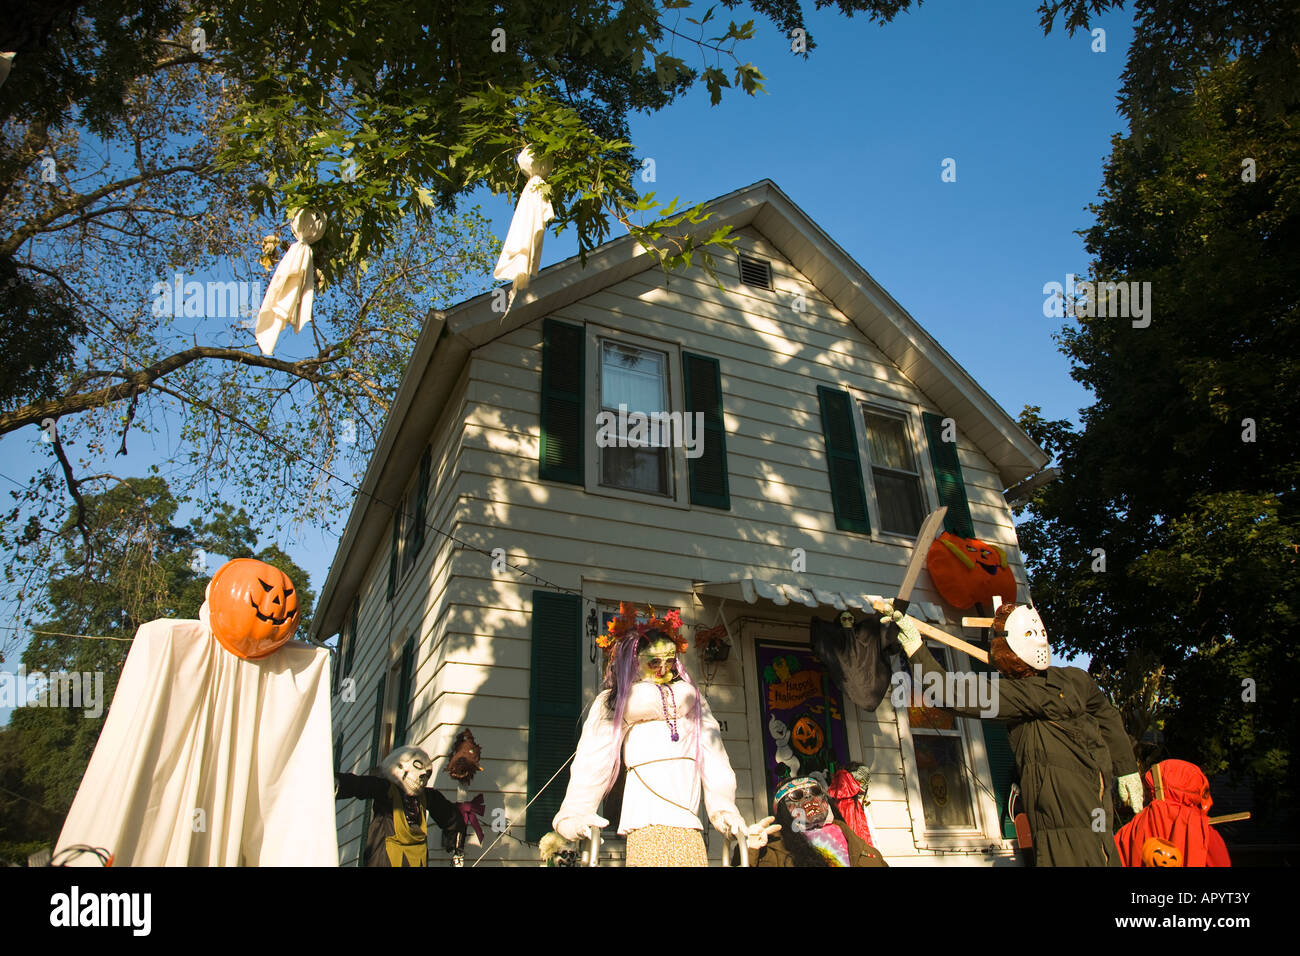 ILLINOIS Dixon Ghoulish Halloween Decorations In Front Yard Of